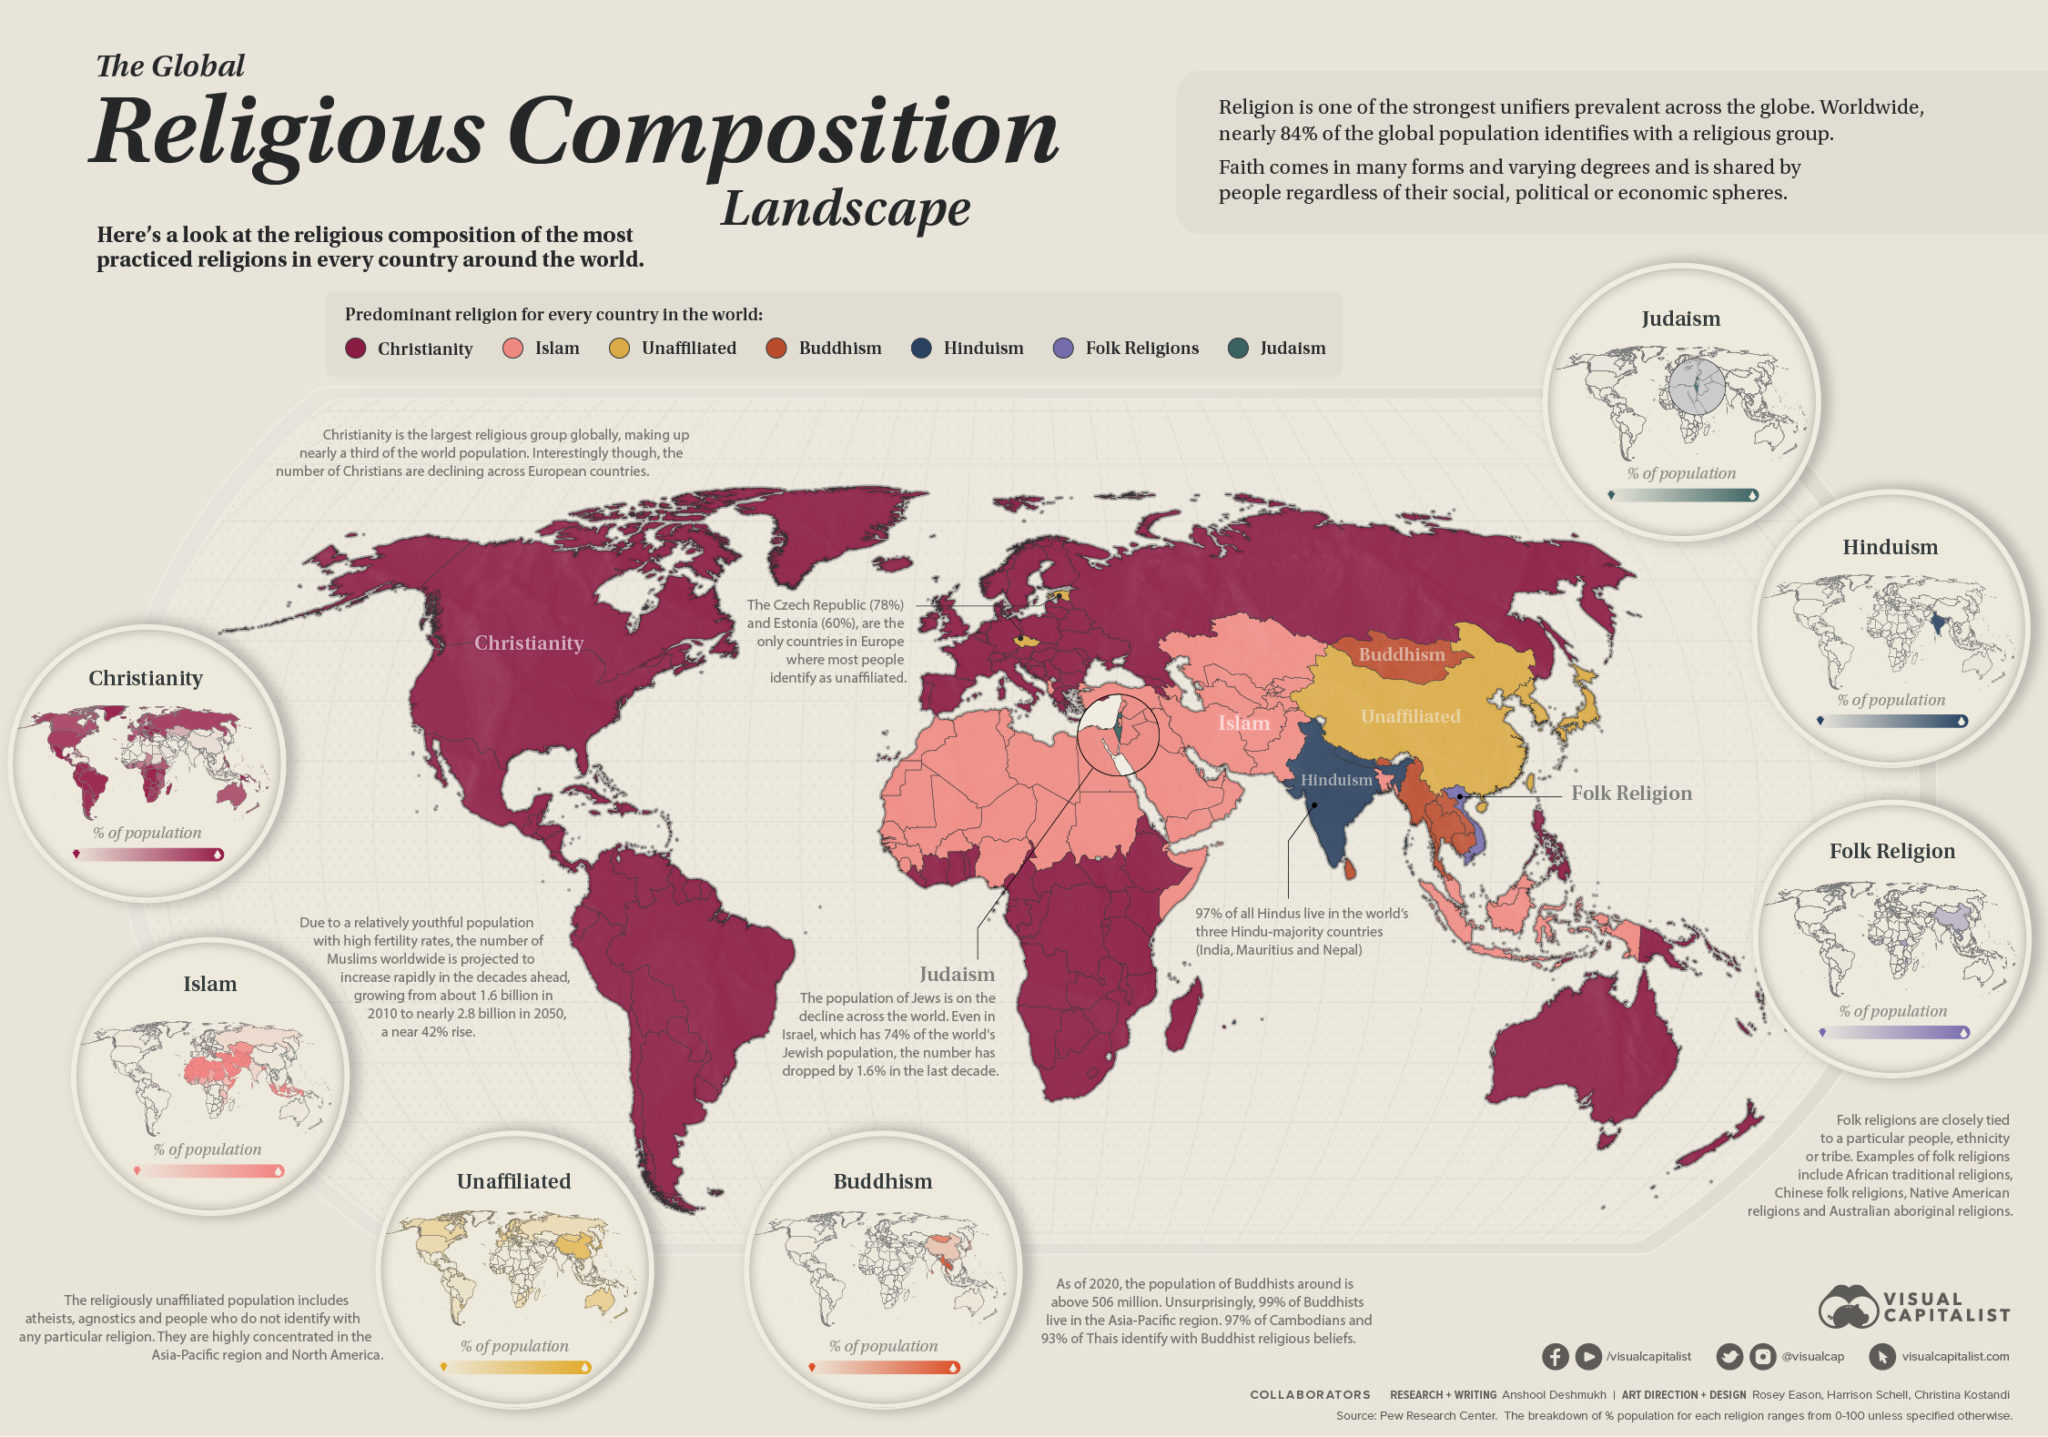 mapped-the-world-s-major-religions-by-distribution-visual